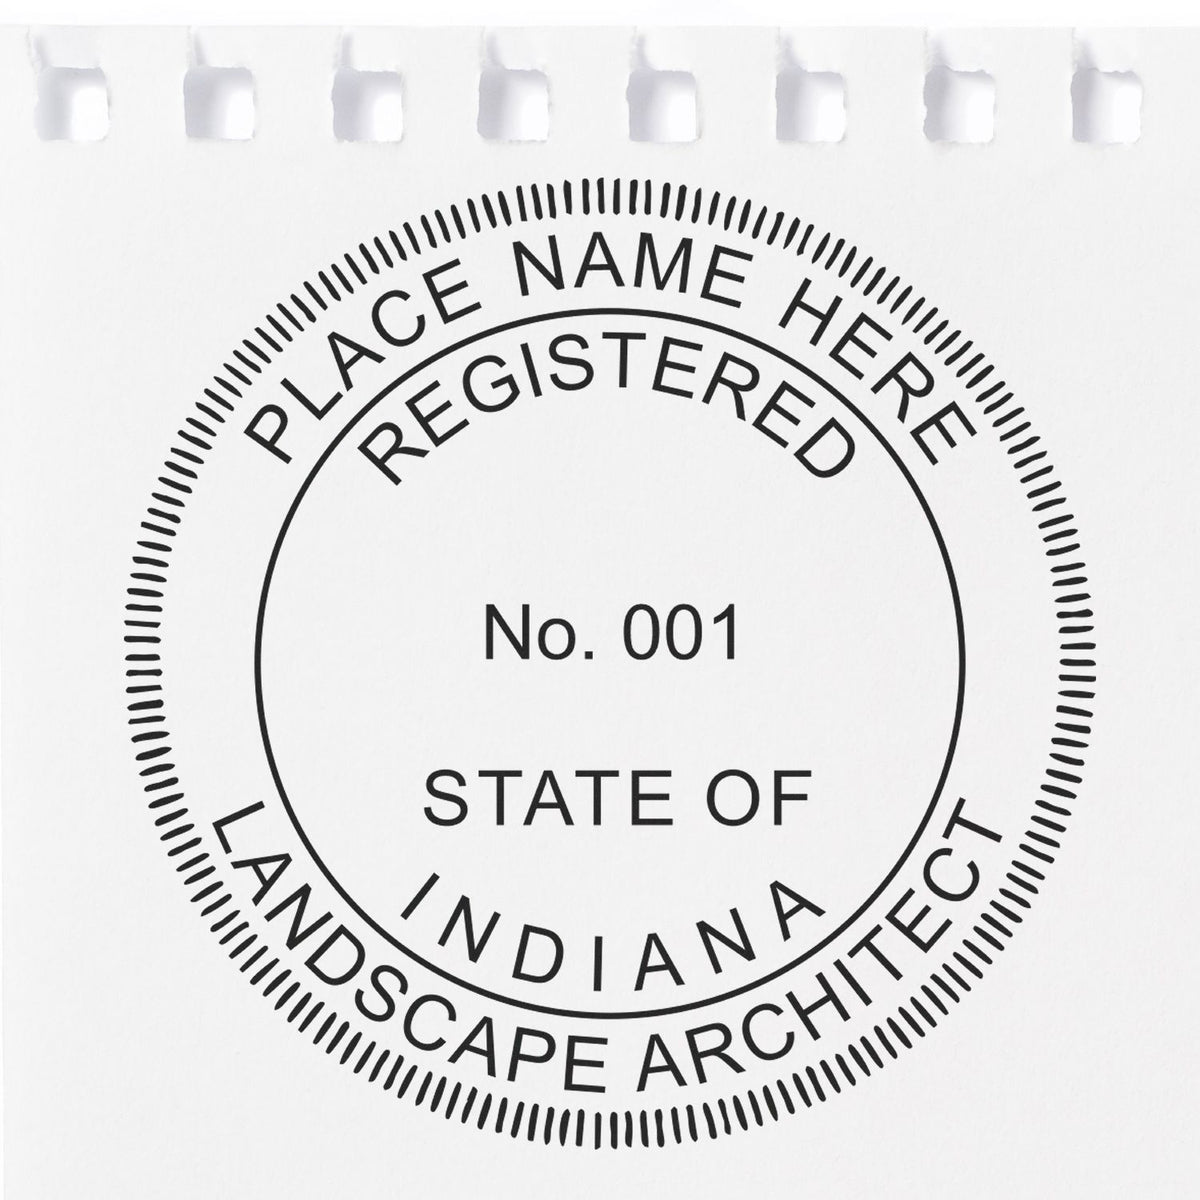 Slim Pre-Inked Indiana Landscape Architect Seal Stamp in use photo showing a stamped imprint of the Slim Pre-Inked Indiana Landscape Architect Seal Stamp